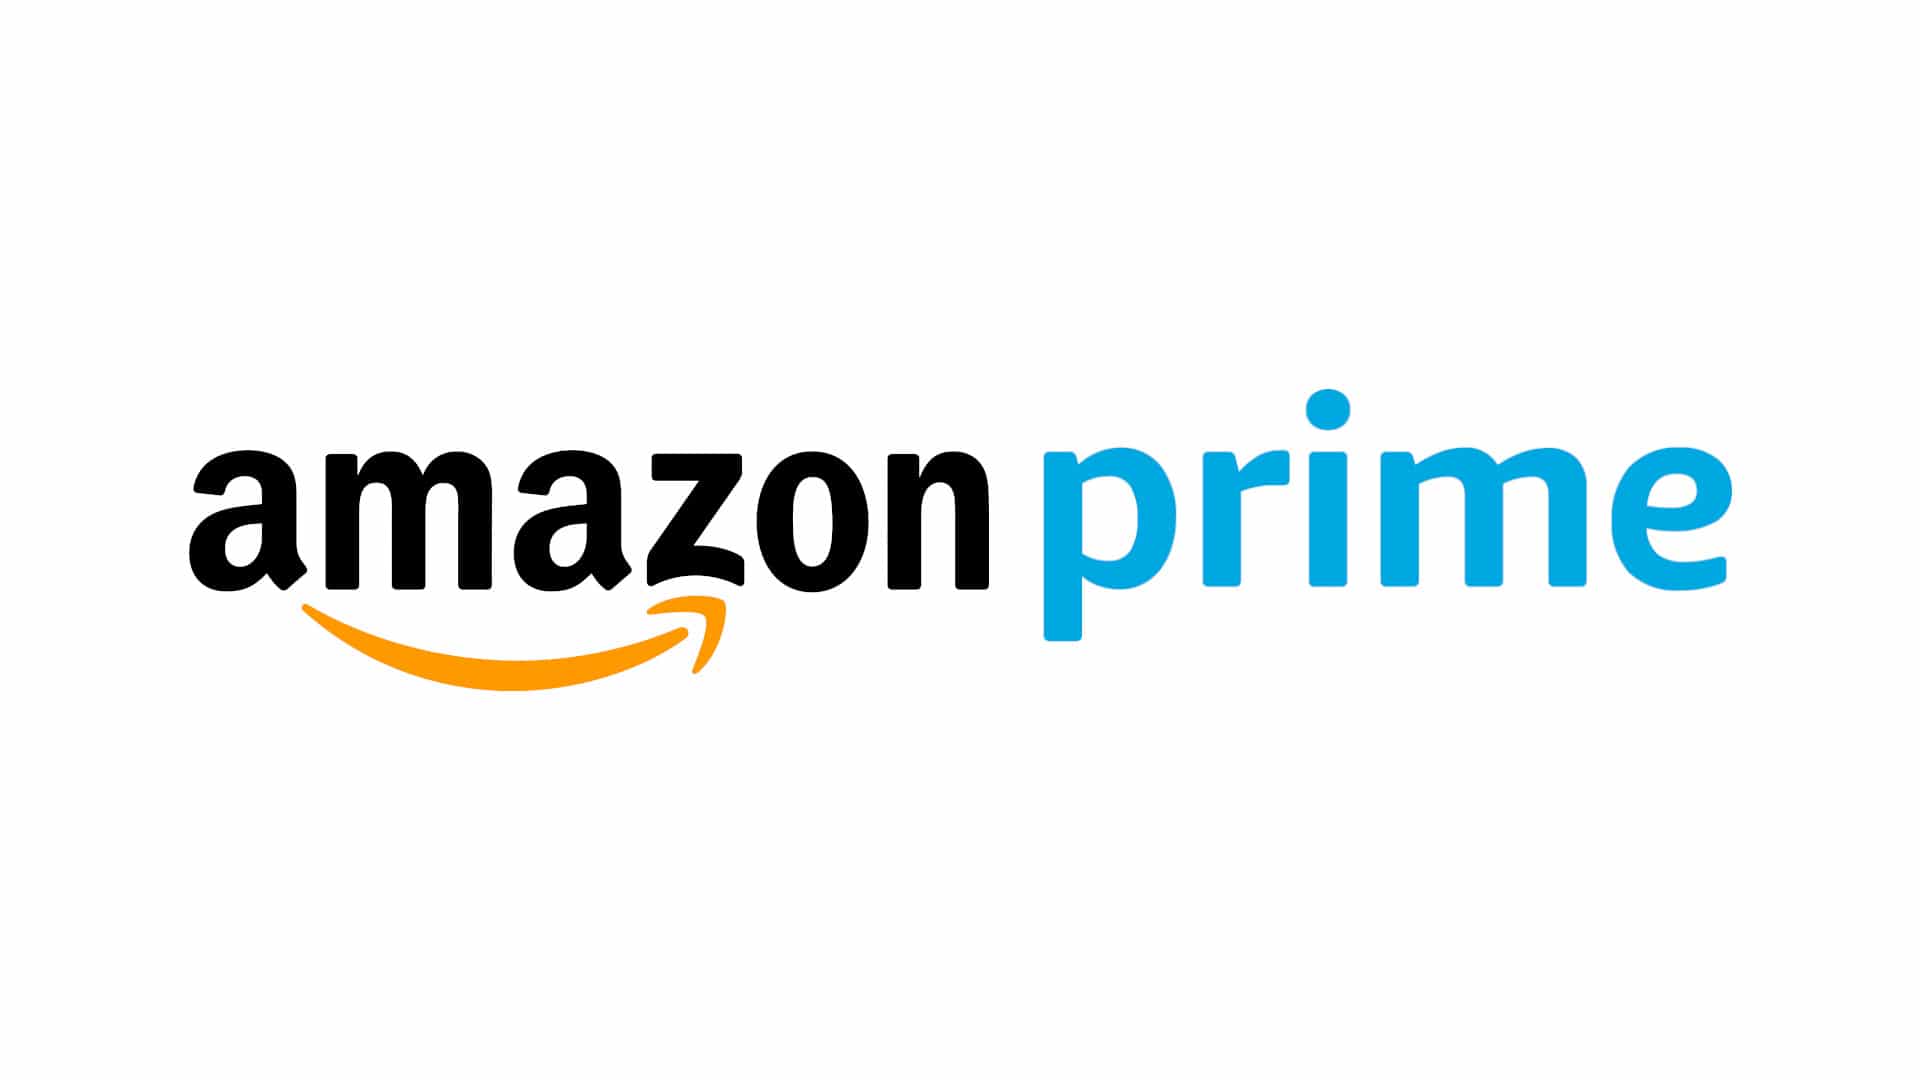 Amazon Buy With Prime Allows Shipping Benefits At Other Stores